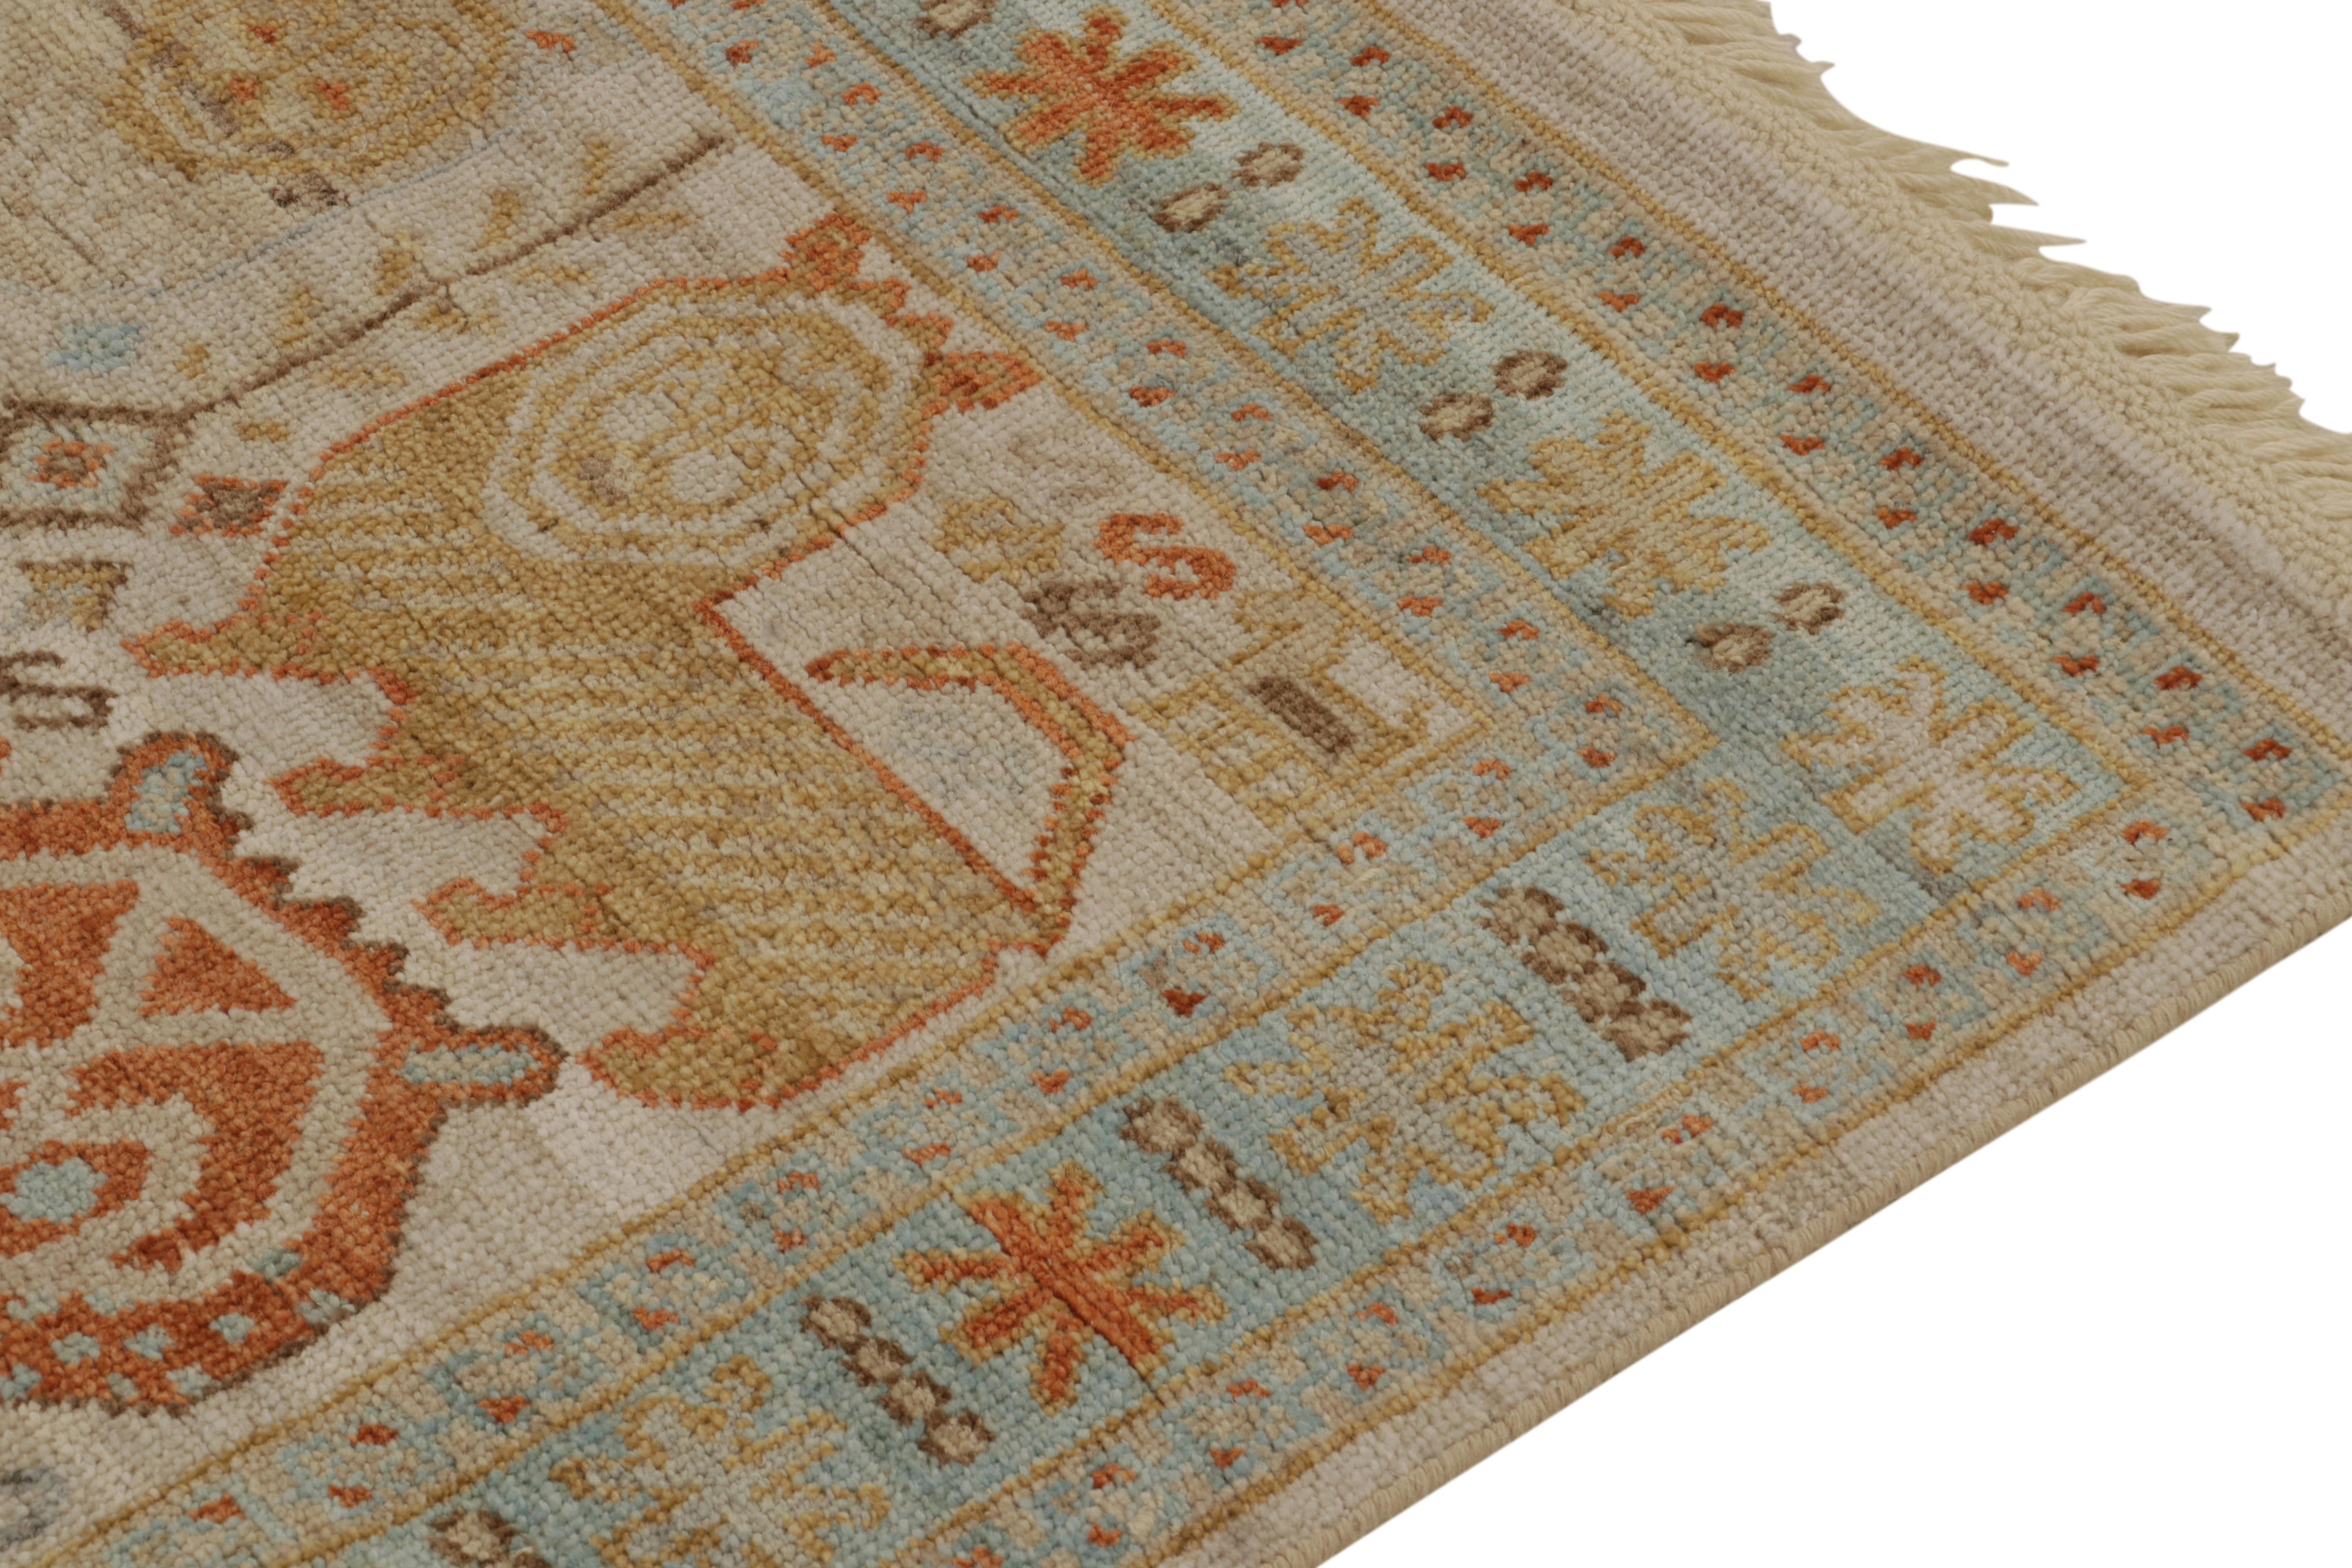 Rug & Kilim’s Tribal Style Runner in Beige-Brown, Blue and Red Pictorials In New Condition For Sale In Long Island City, NY